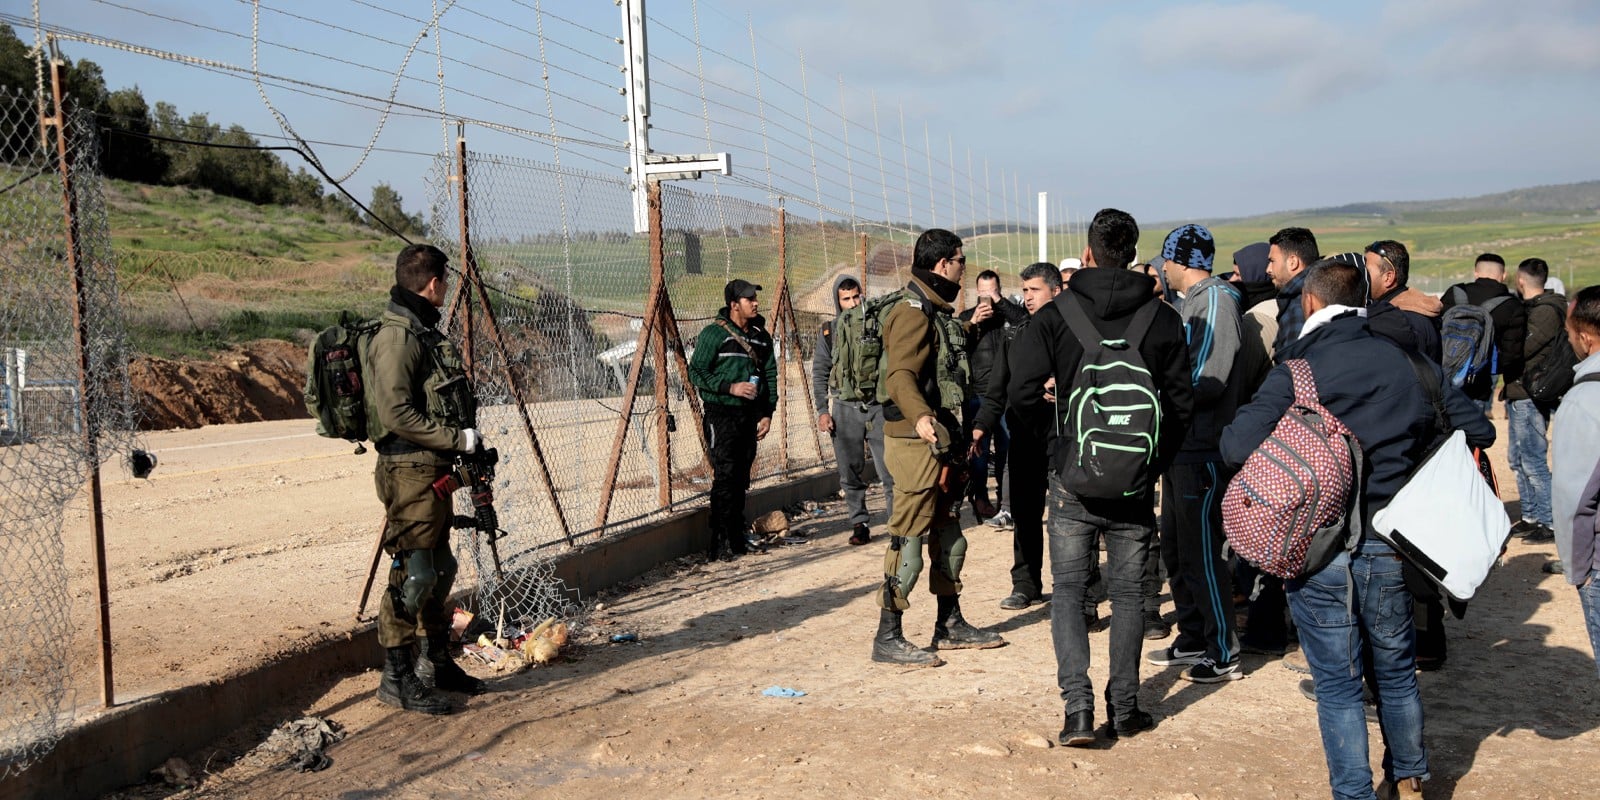 Palestinian workers try to enter Israel through a checkpoint between the West Bank city of Hebron and Beersheva.